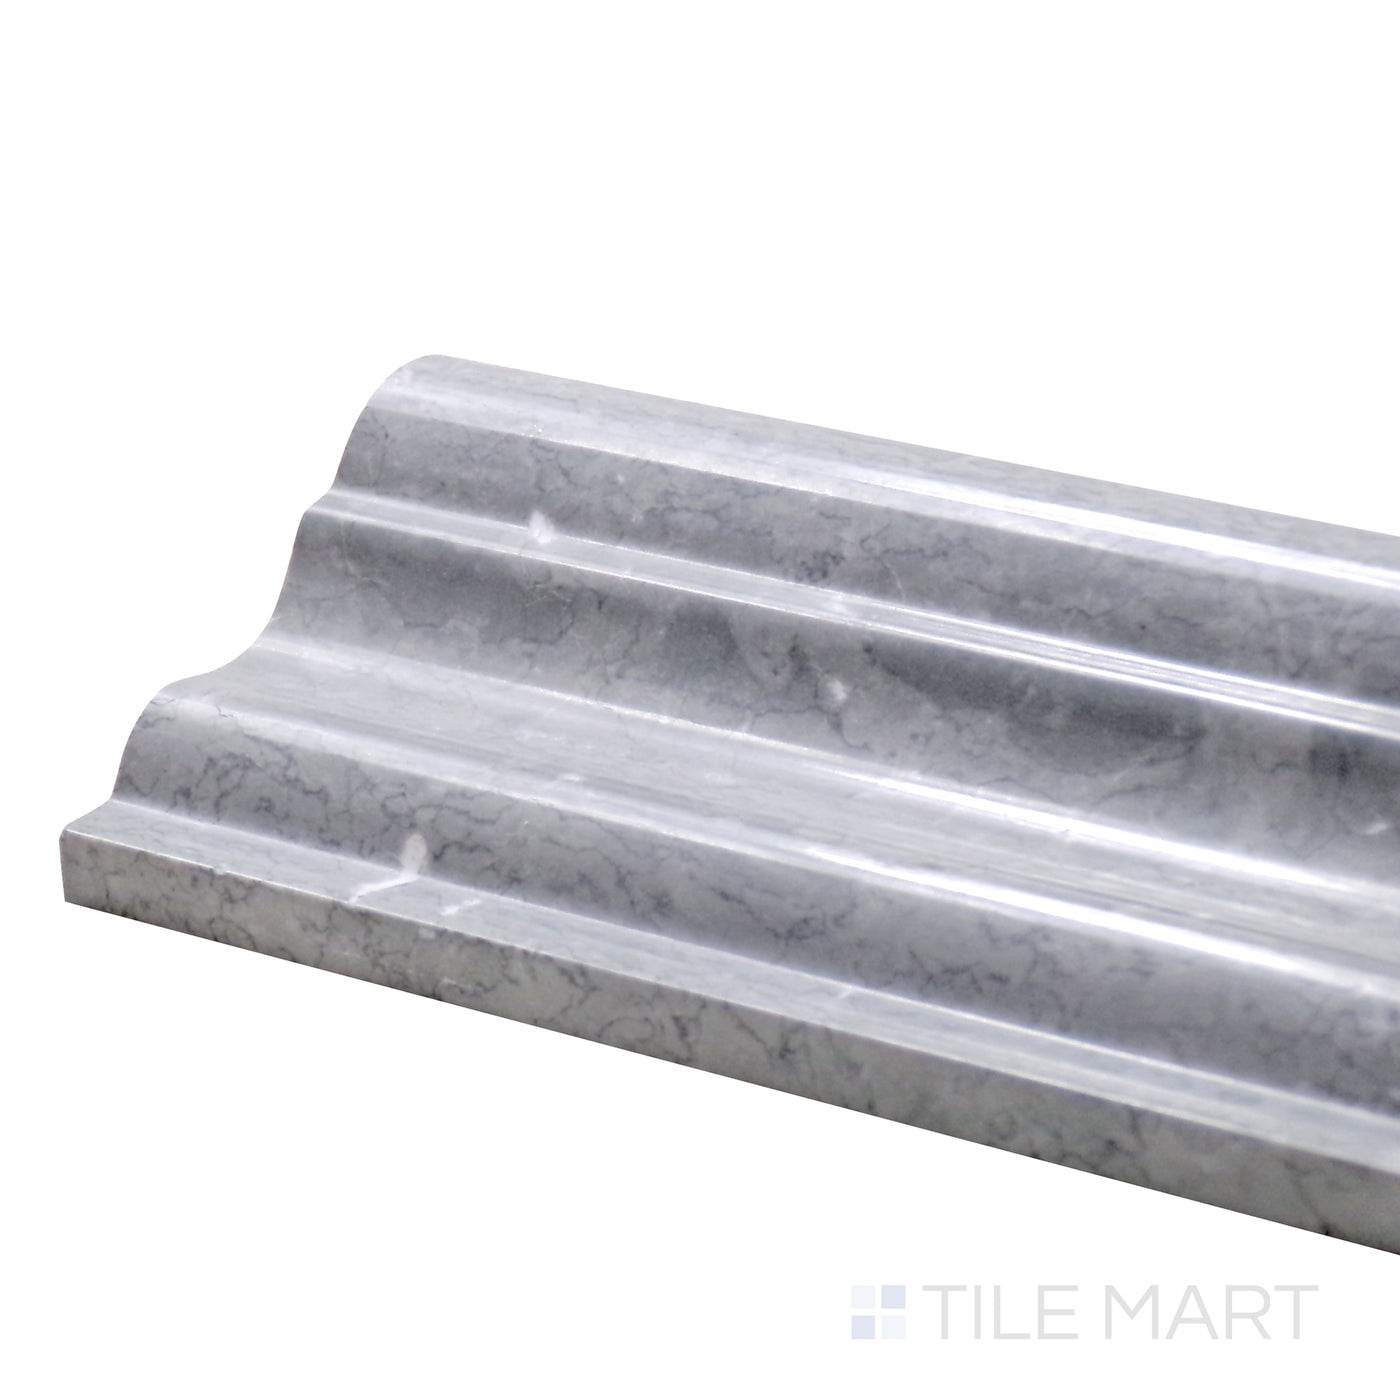 Sto-Re Chairrail Marble Trim 2.5X12 Wooden Blue Polished